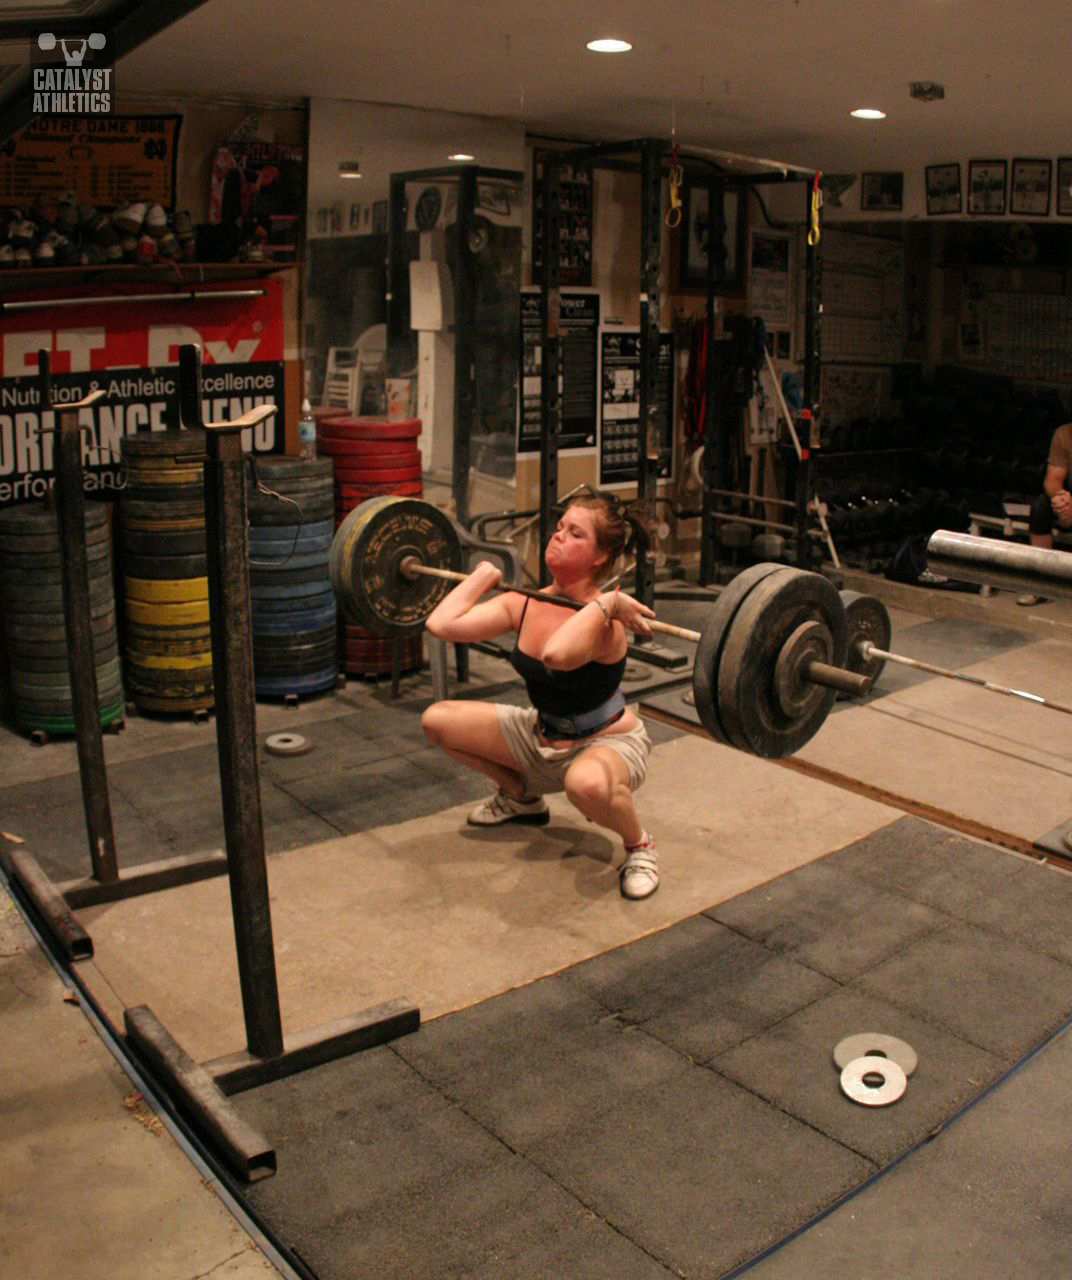 Sage cleaning - Olympic Weightlifting, strength, conditioning, fitness, nutrition - Catalyst Athletics 